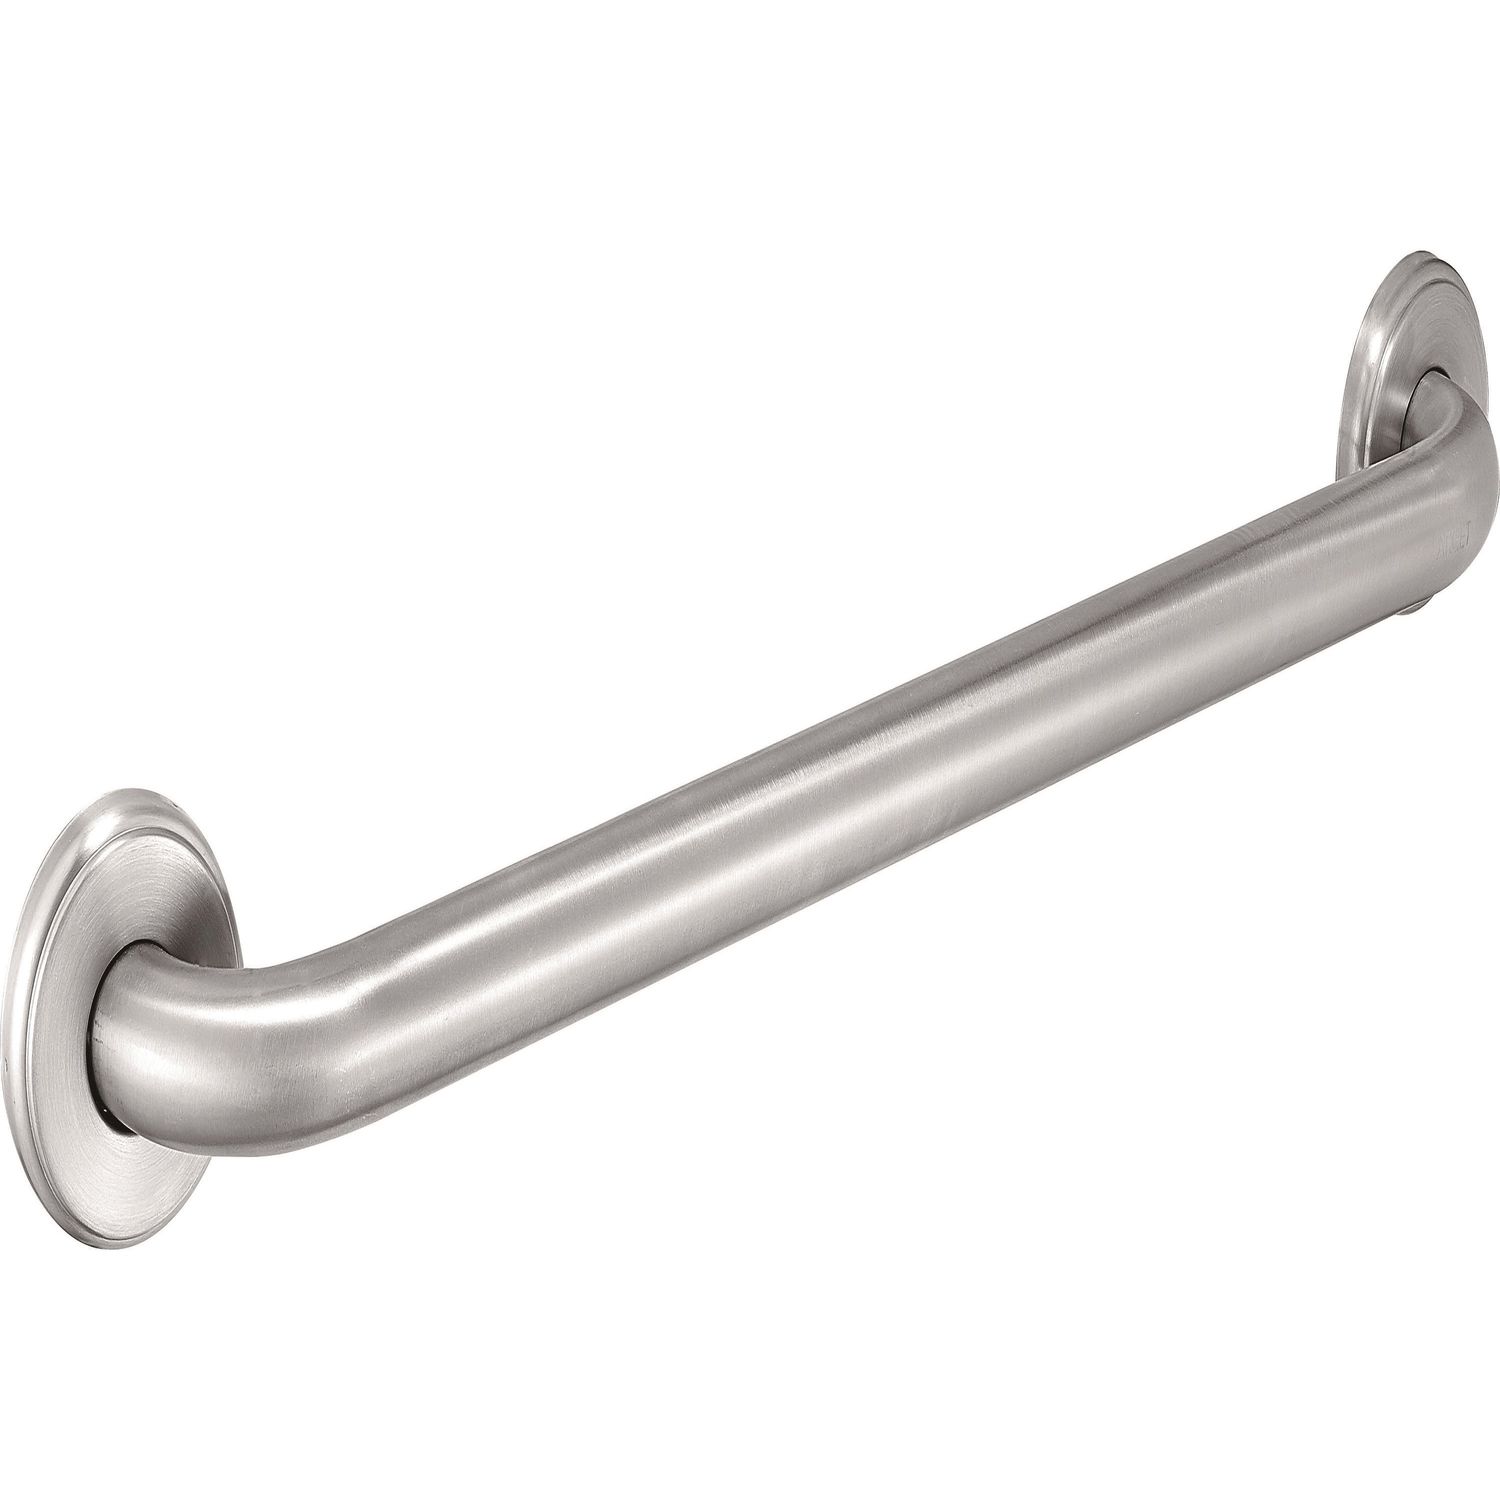 Grab Bar 3.4" Width x 3.4" Height x 27.4" Length, 1 Each, Silver, Stainless Steel